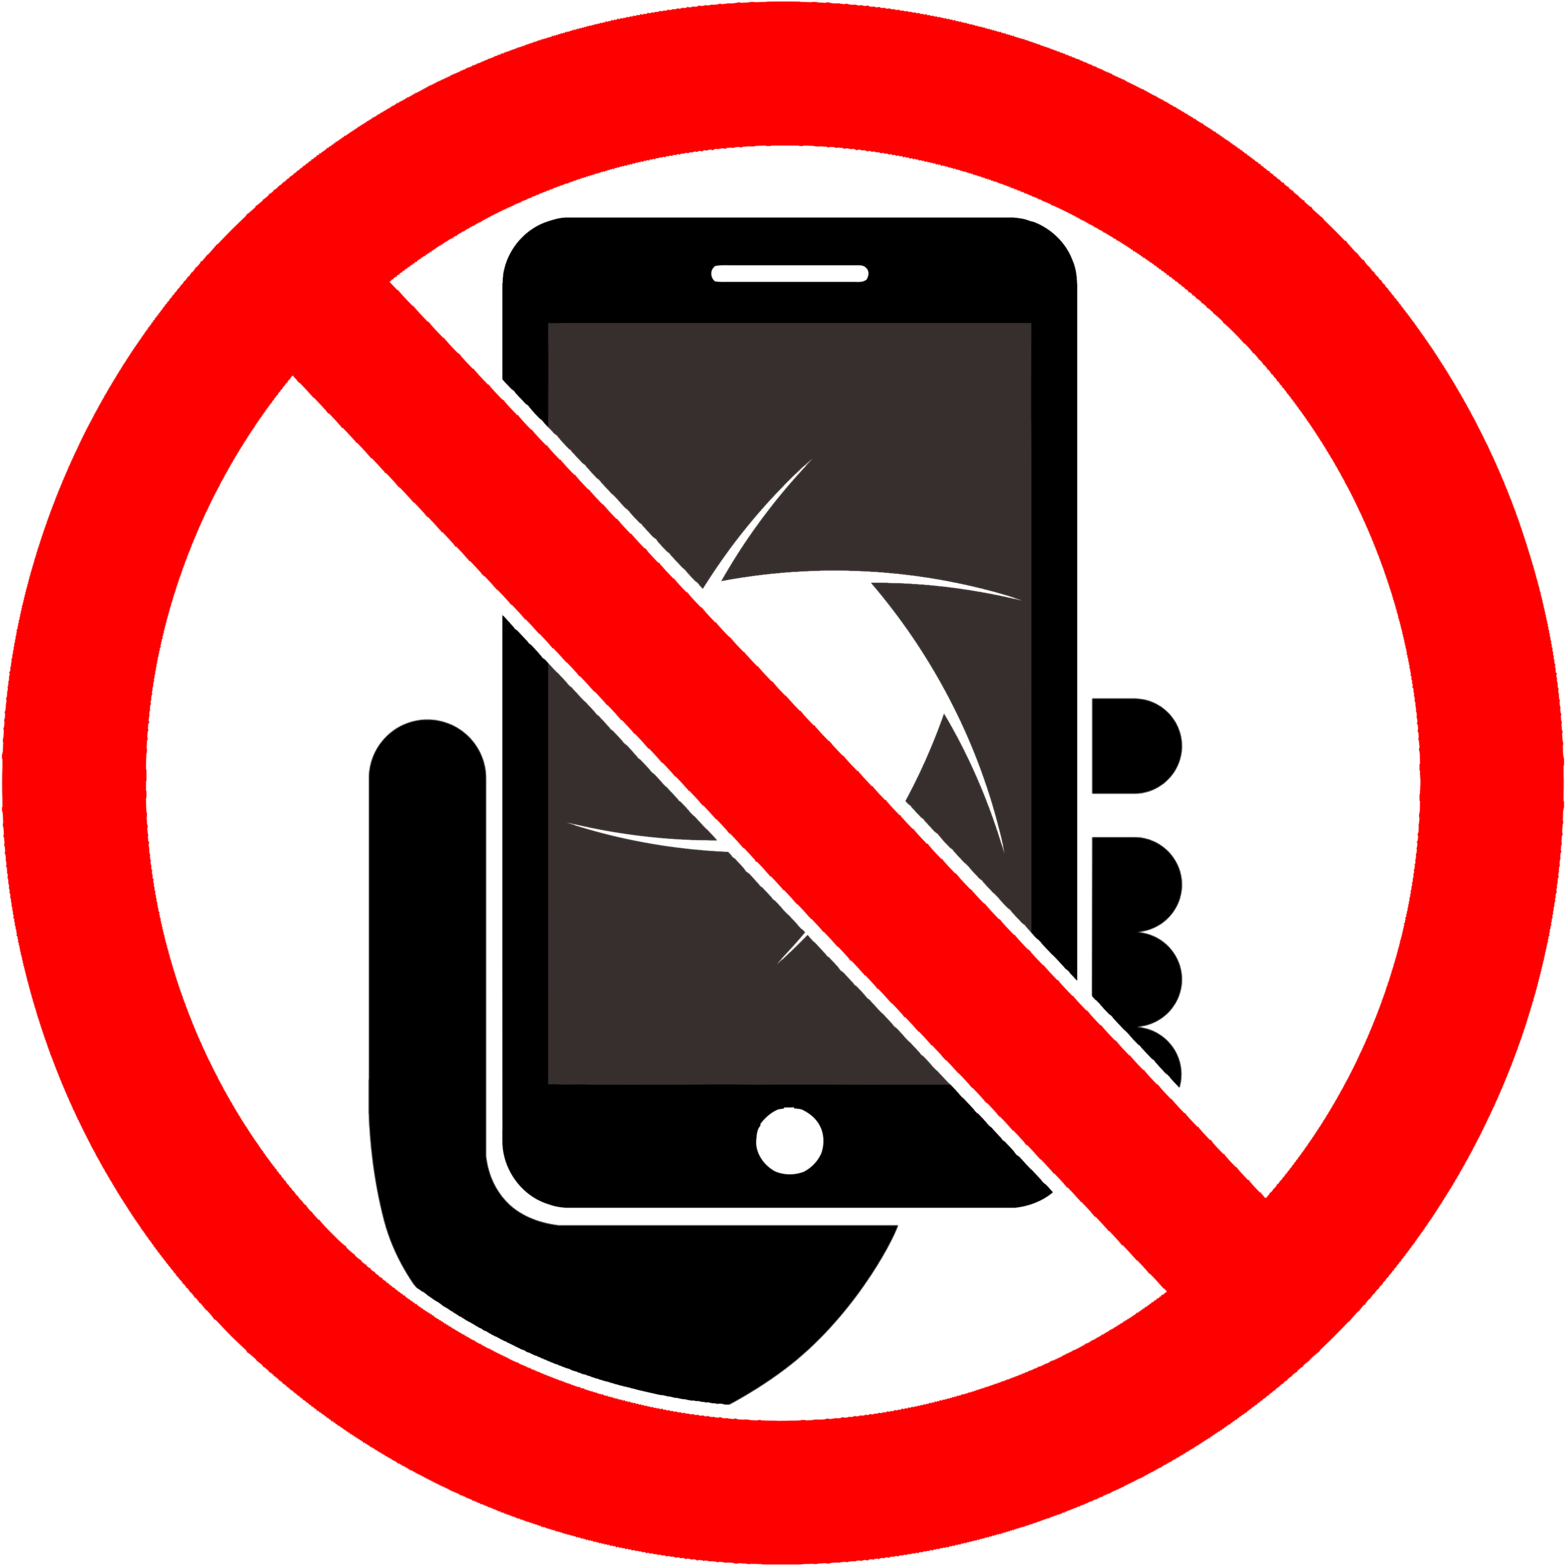 No Cell Phone While Driving Sign - Design (1600x1600)